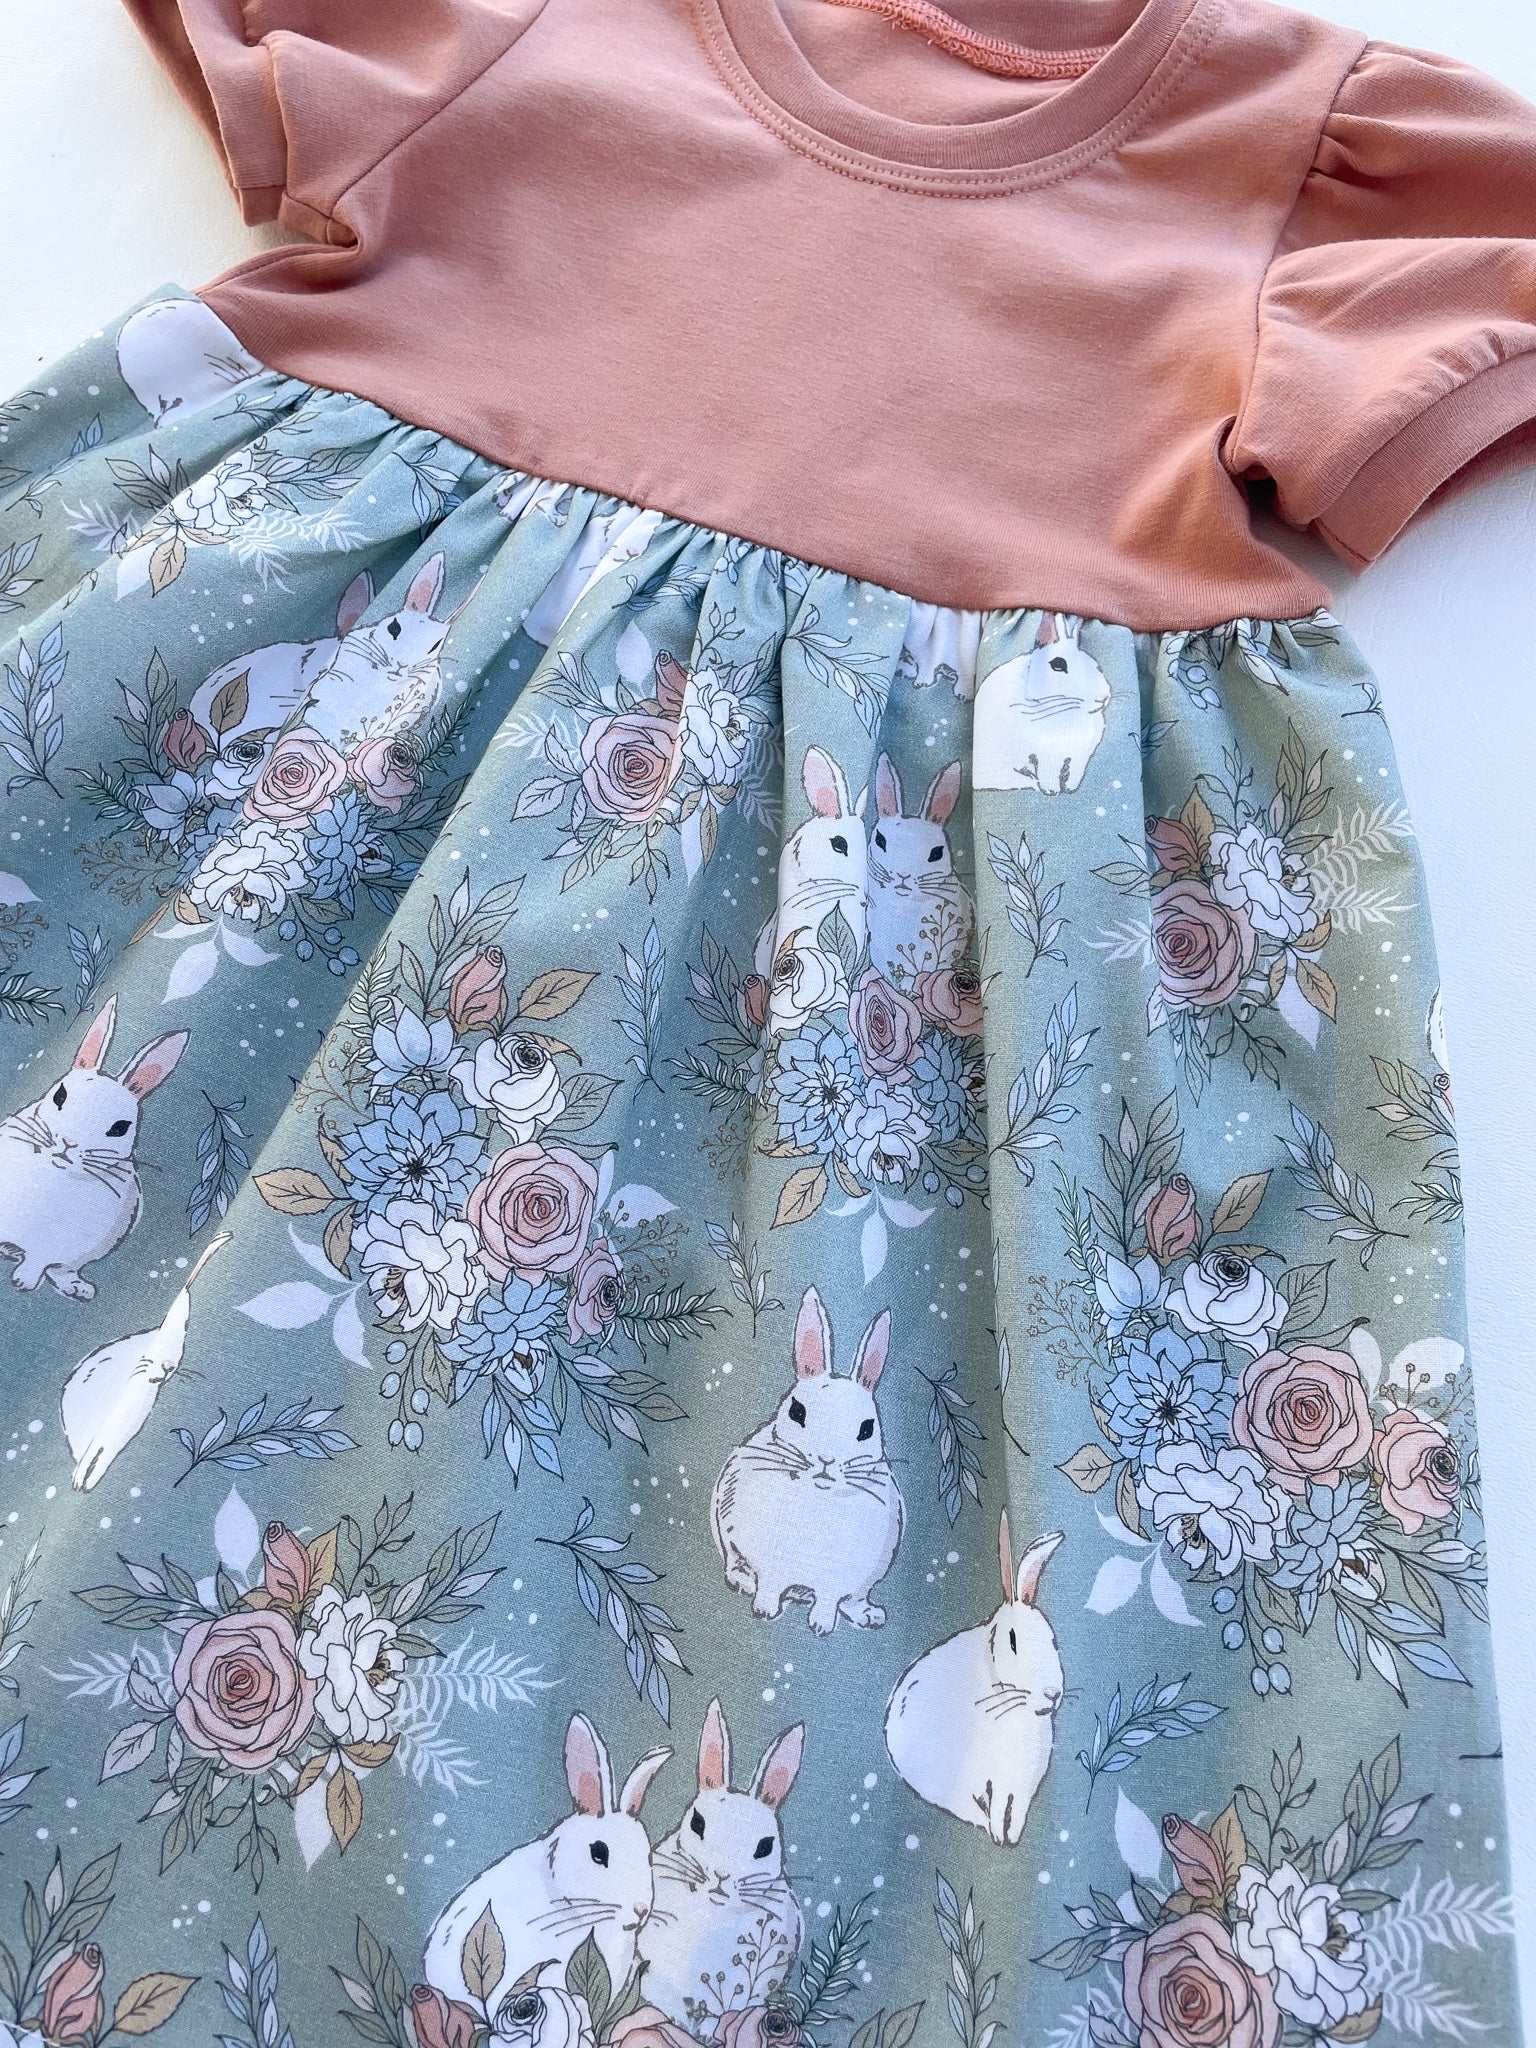 Garden Bunnies 🐰 Play Dress | Made with Organic Cotton *ships in 1-2 weeks*